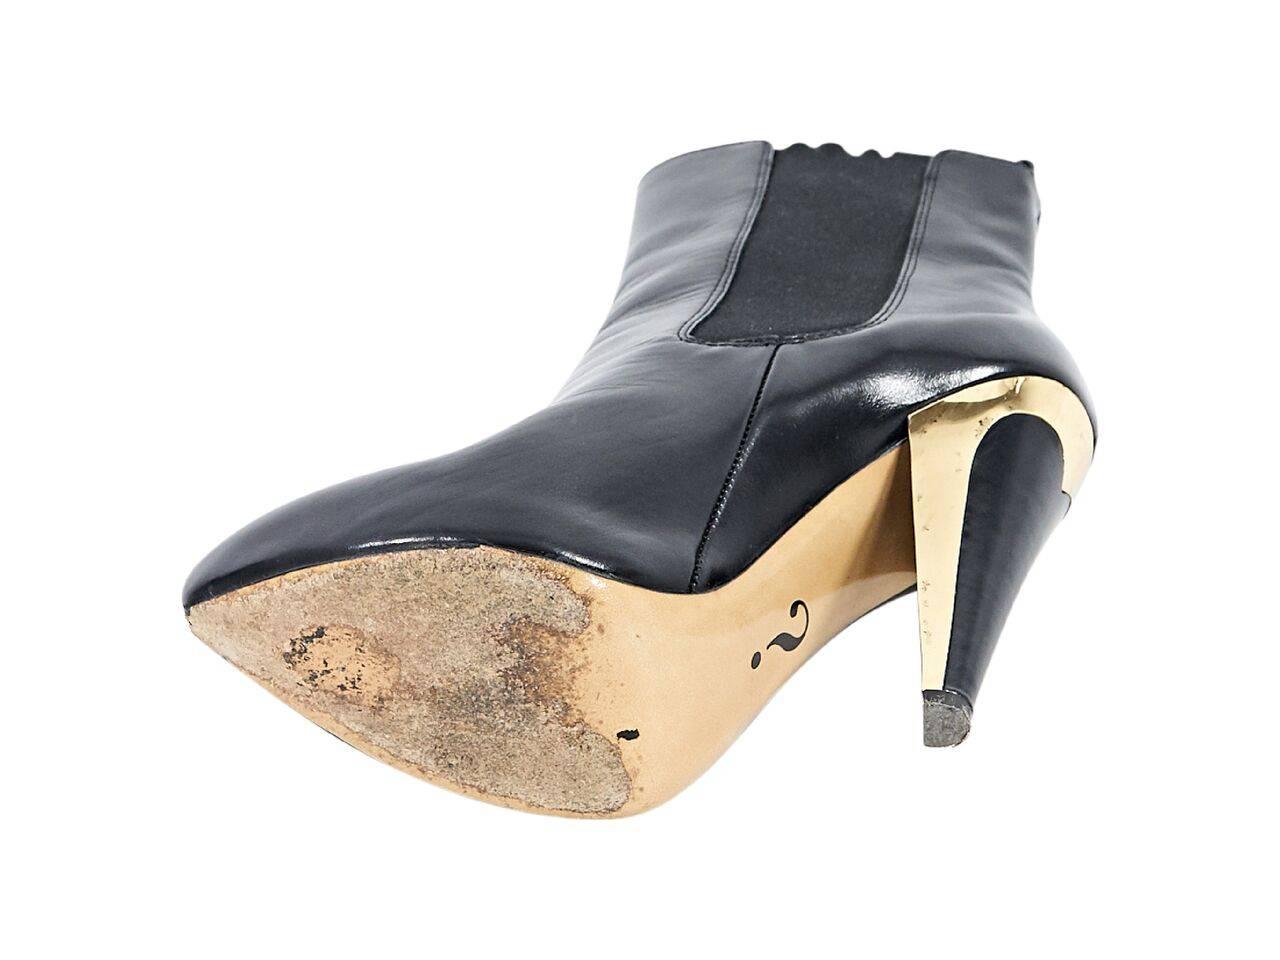 Product details:  Black leather Chelsea ankle boots by Moschino.  Elasticized side panels for an easy fit.  Almond toe.  Metallic gold and black heel.  Concealed platform.  Pull-on style. 
Condition: Pre-owned. Very good.
Est. Retail $ 728.00